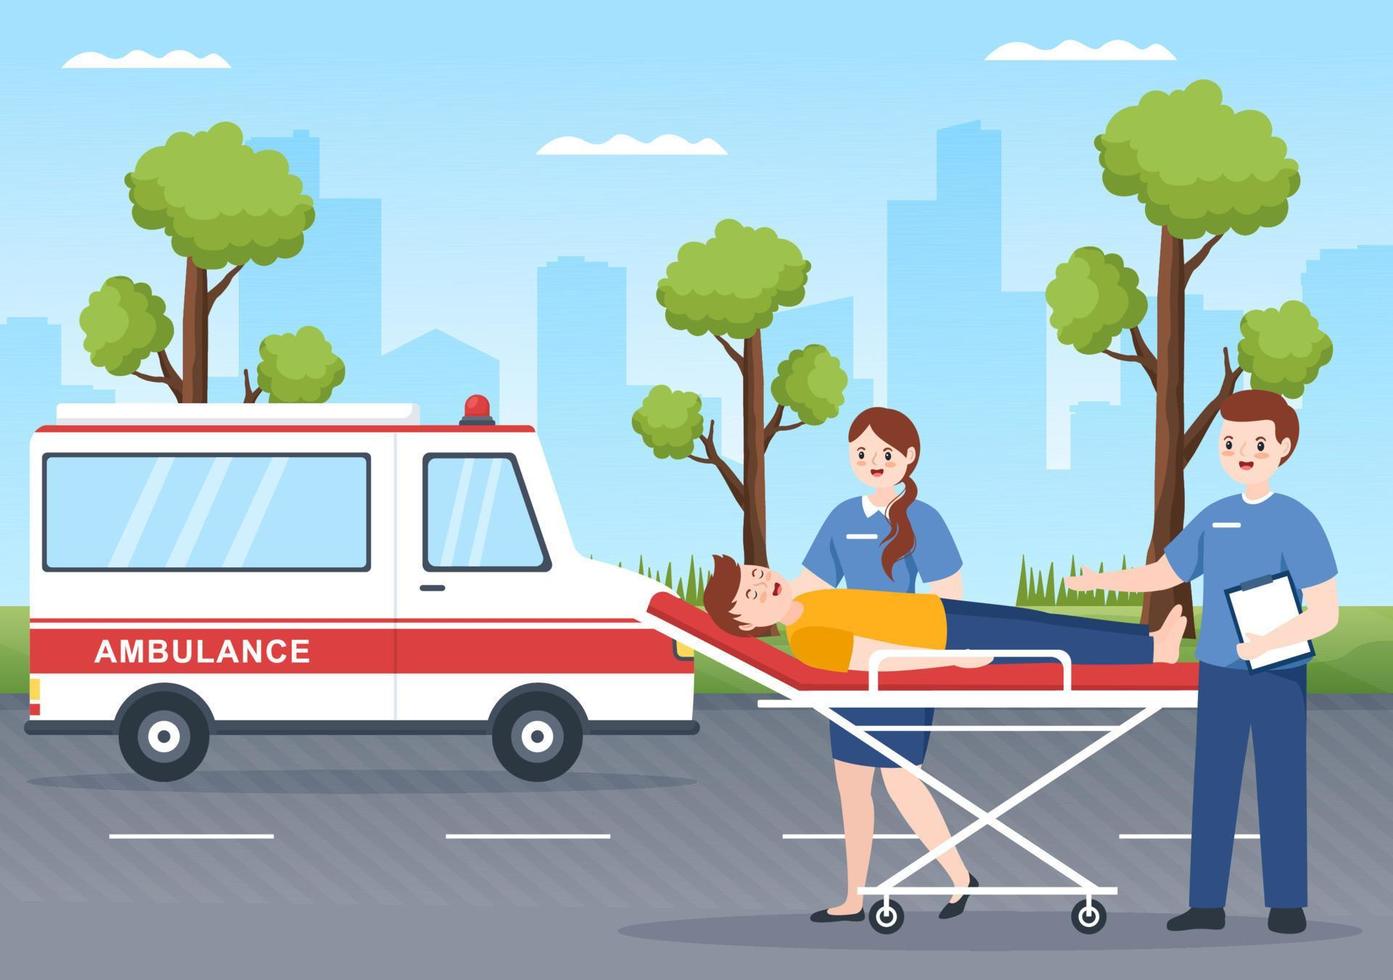 Medical Vehicle Ambulance Car or Emergency Service for Pick Up Patient the Injured in an Accident in Flat Cartoon Hand Drawn Templates Illustration vector